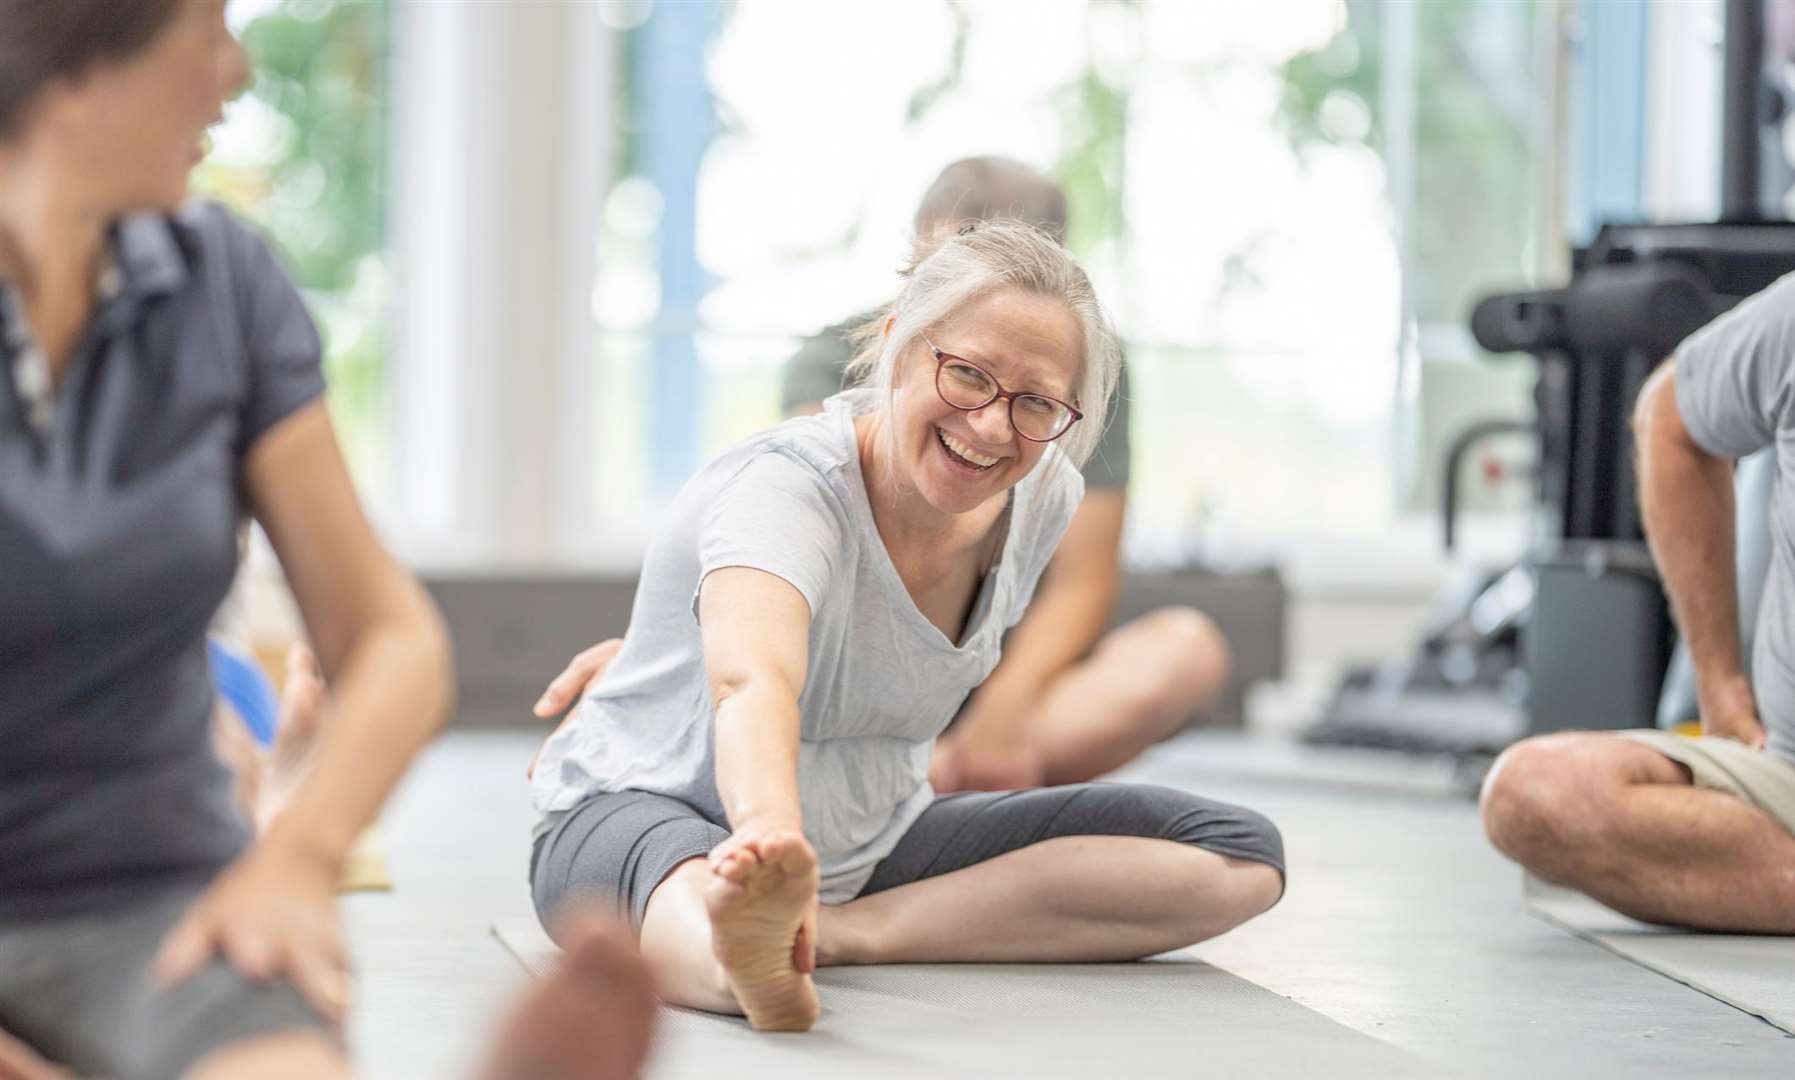 There are sessions on yoga, meditation, nutrition, mental health and more. Picture: iStock